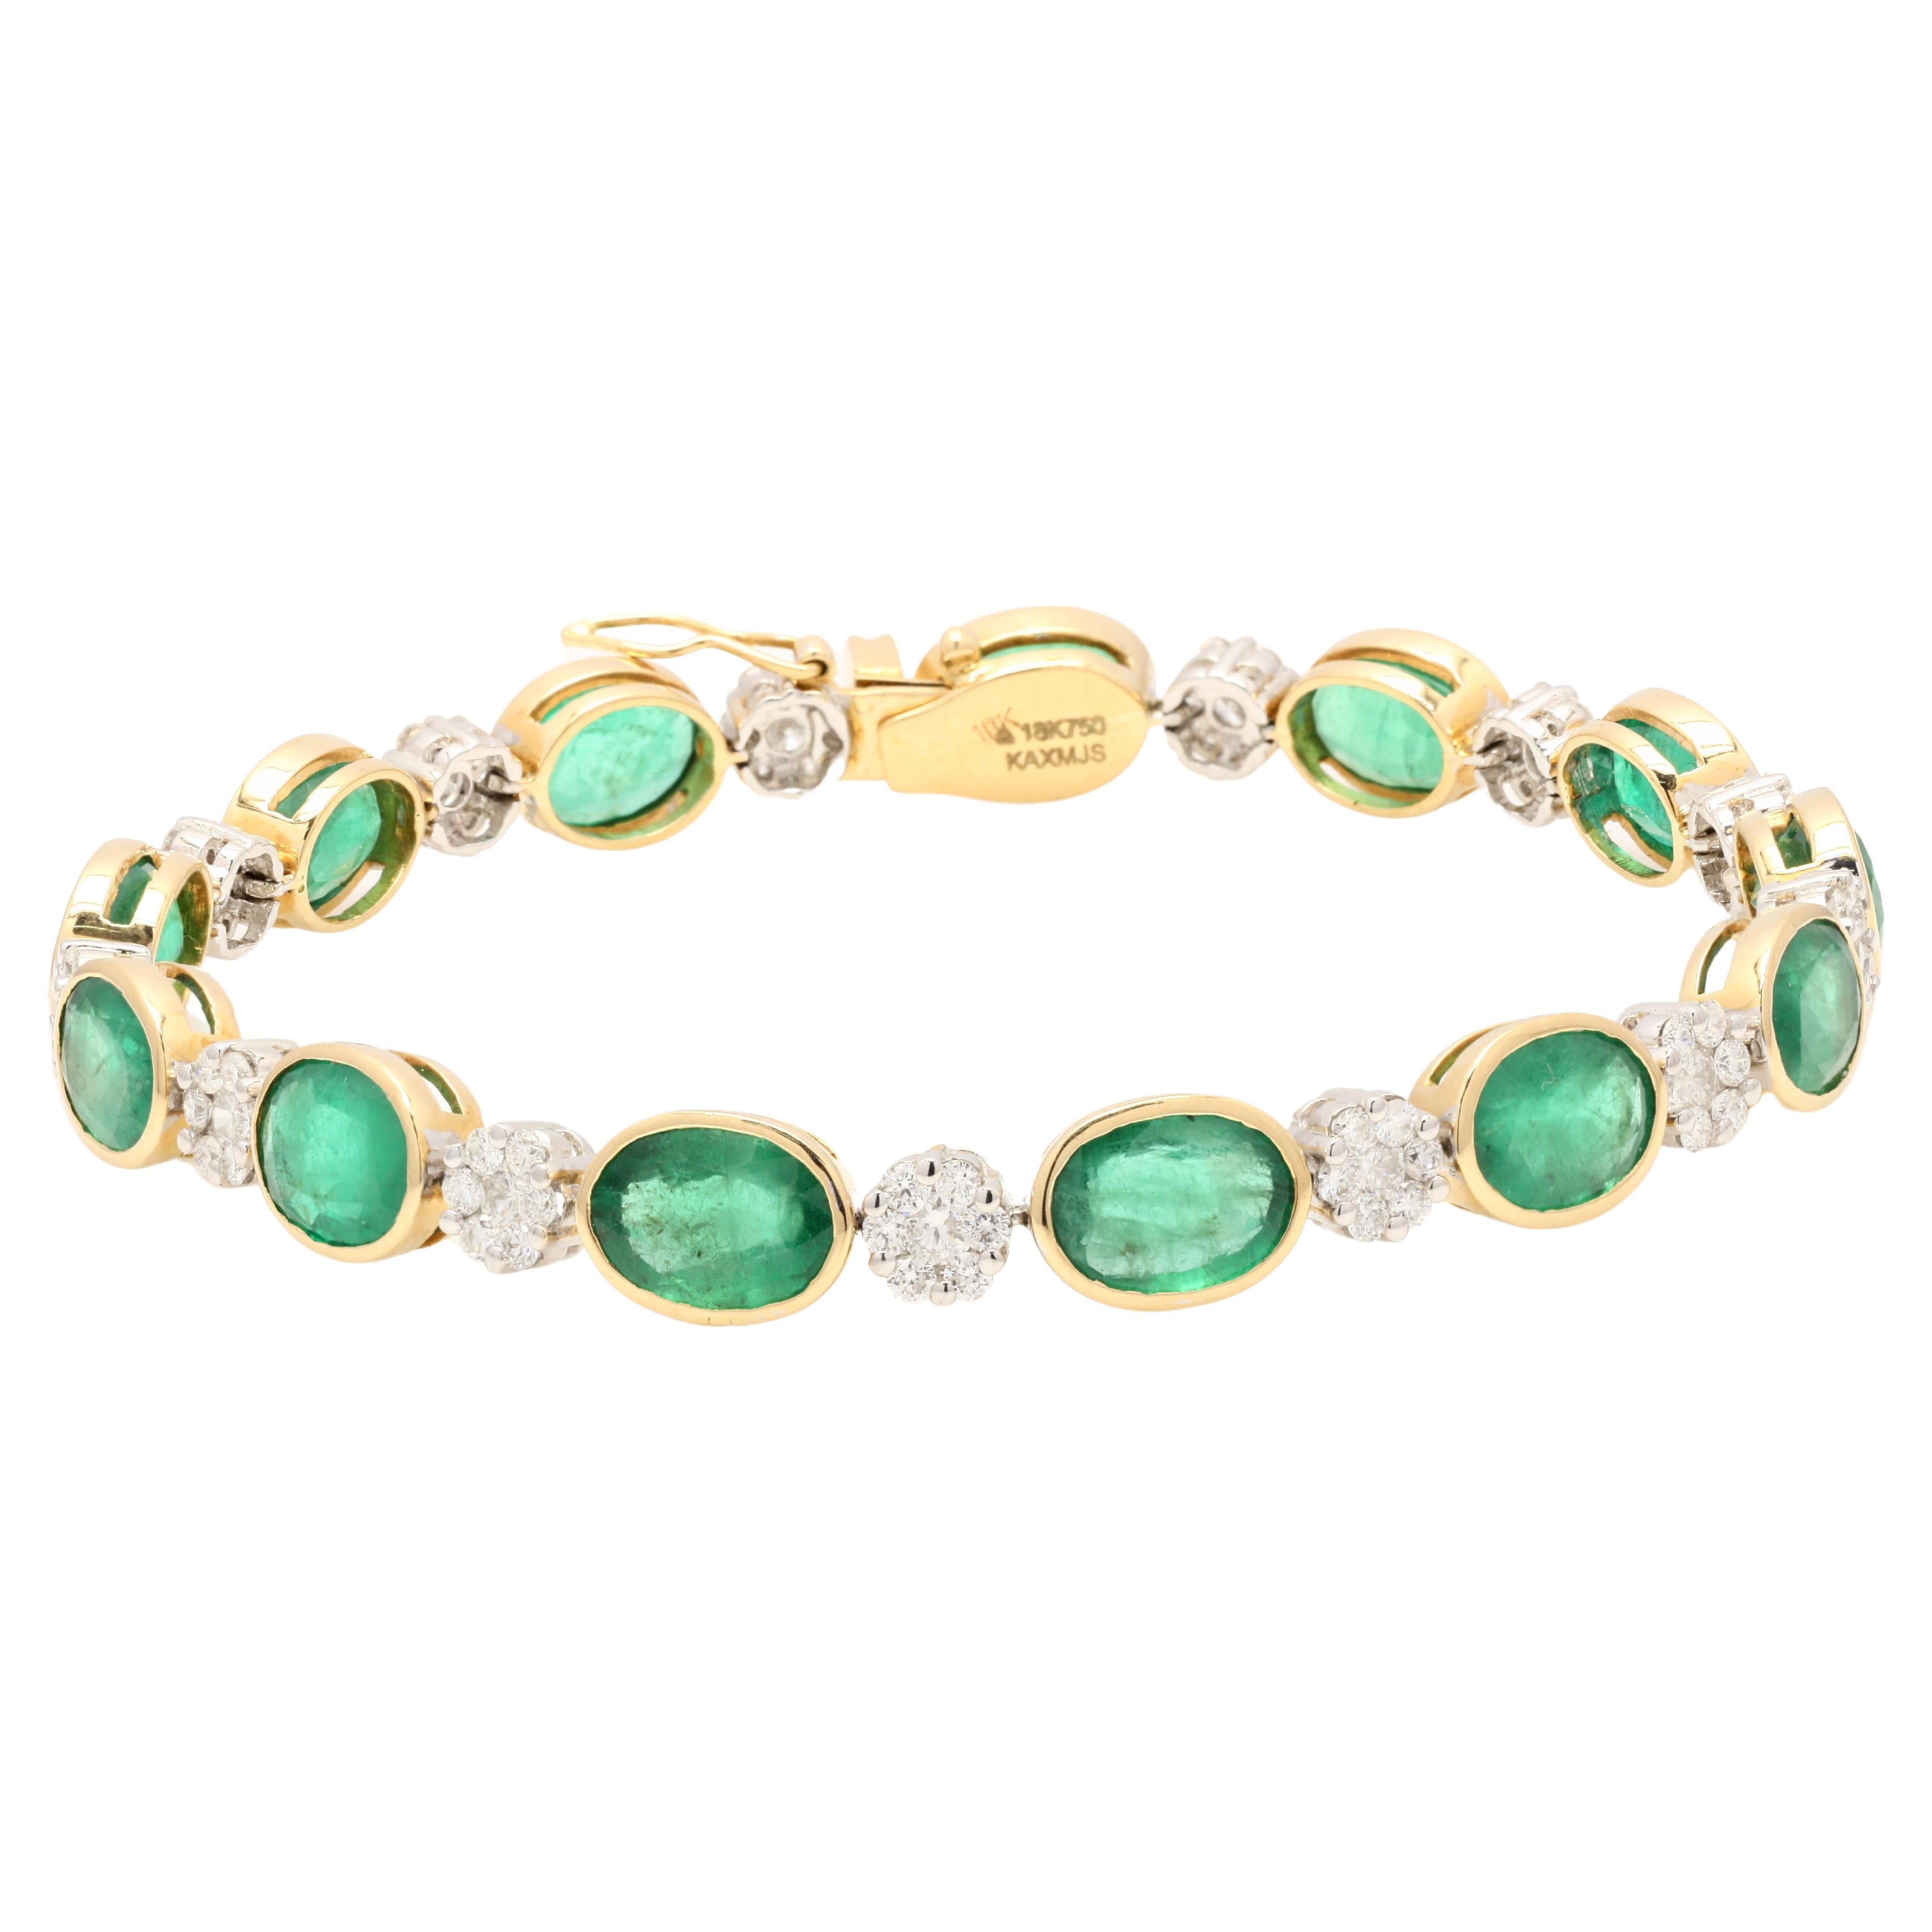 Significant Diamond Emerald Tennis Bracelet in 18K Solid Yellow Gold